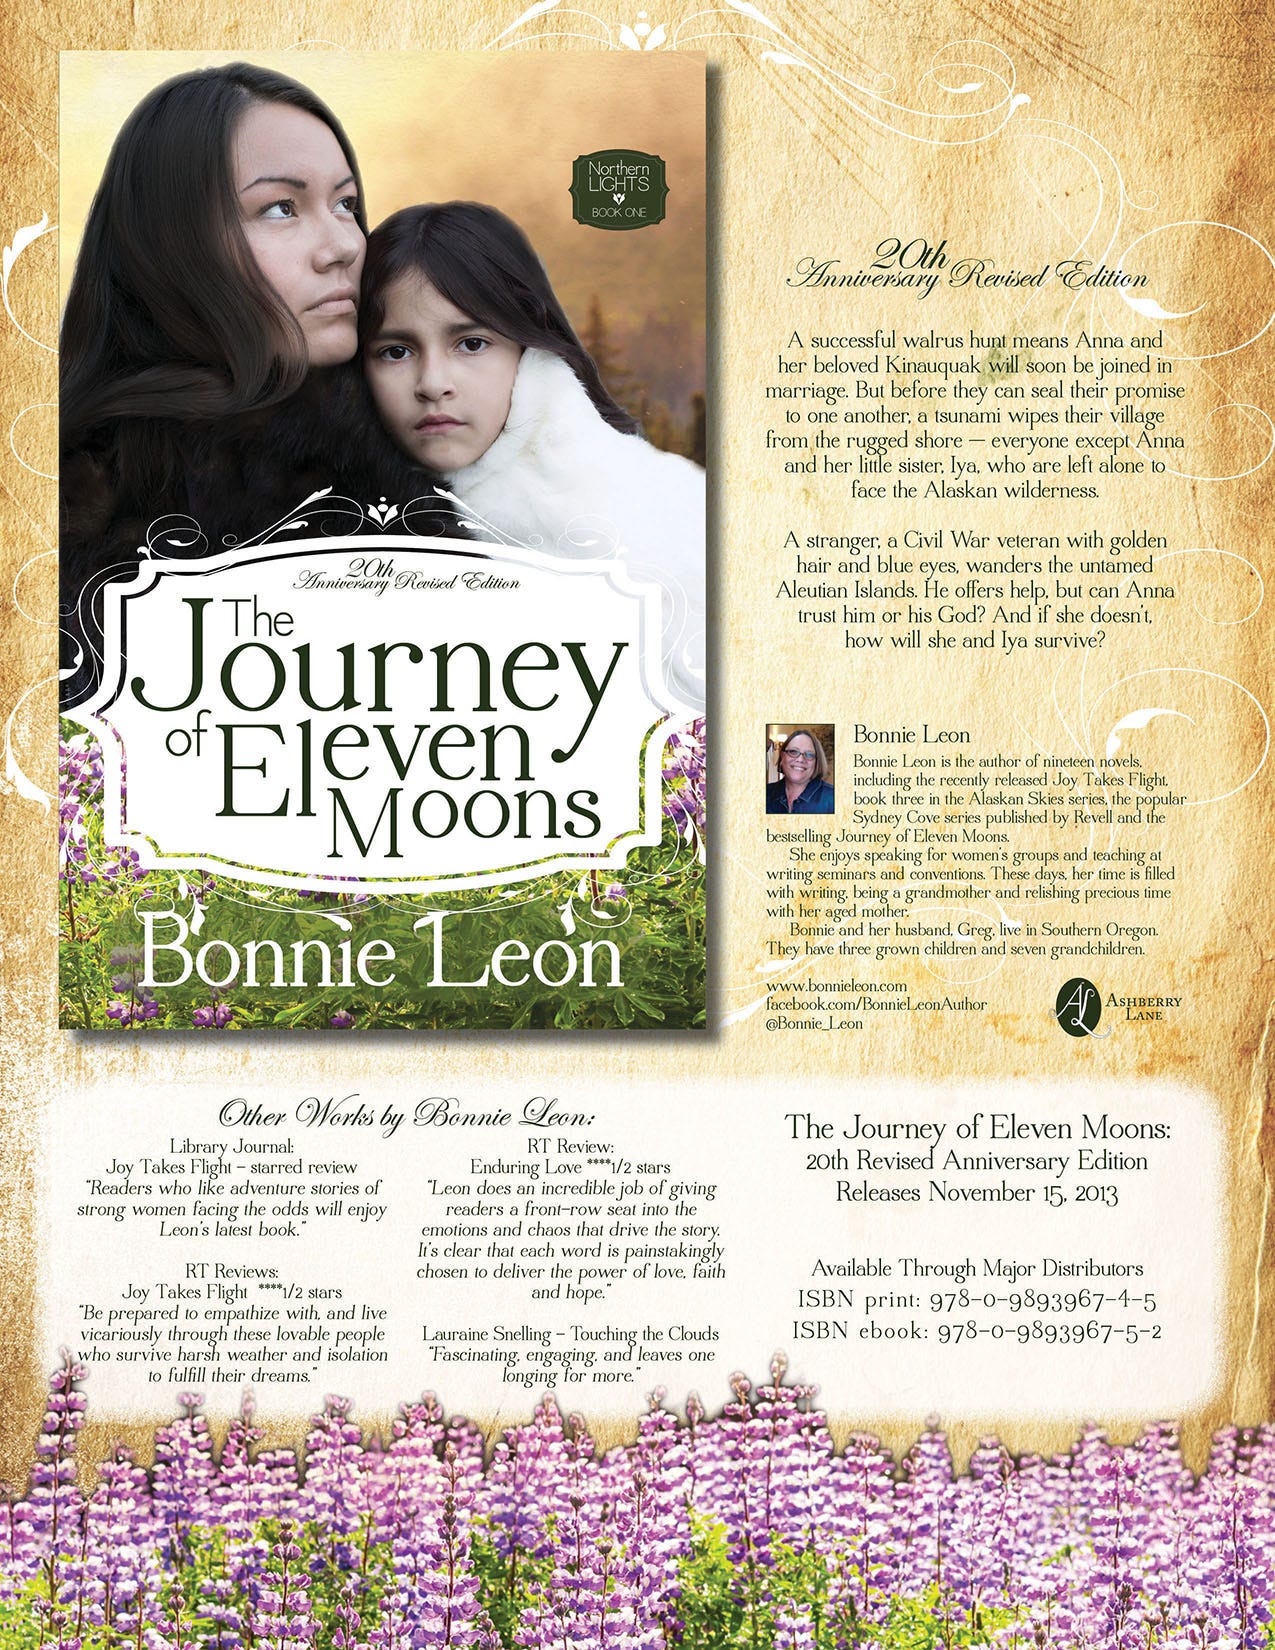 The Journey of Eleven Moons by Bonnie Leon